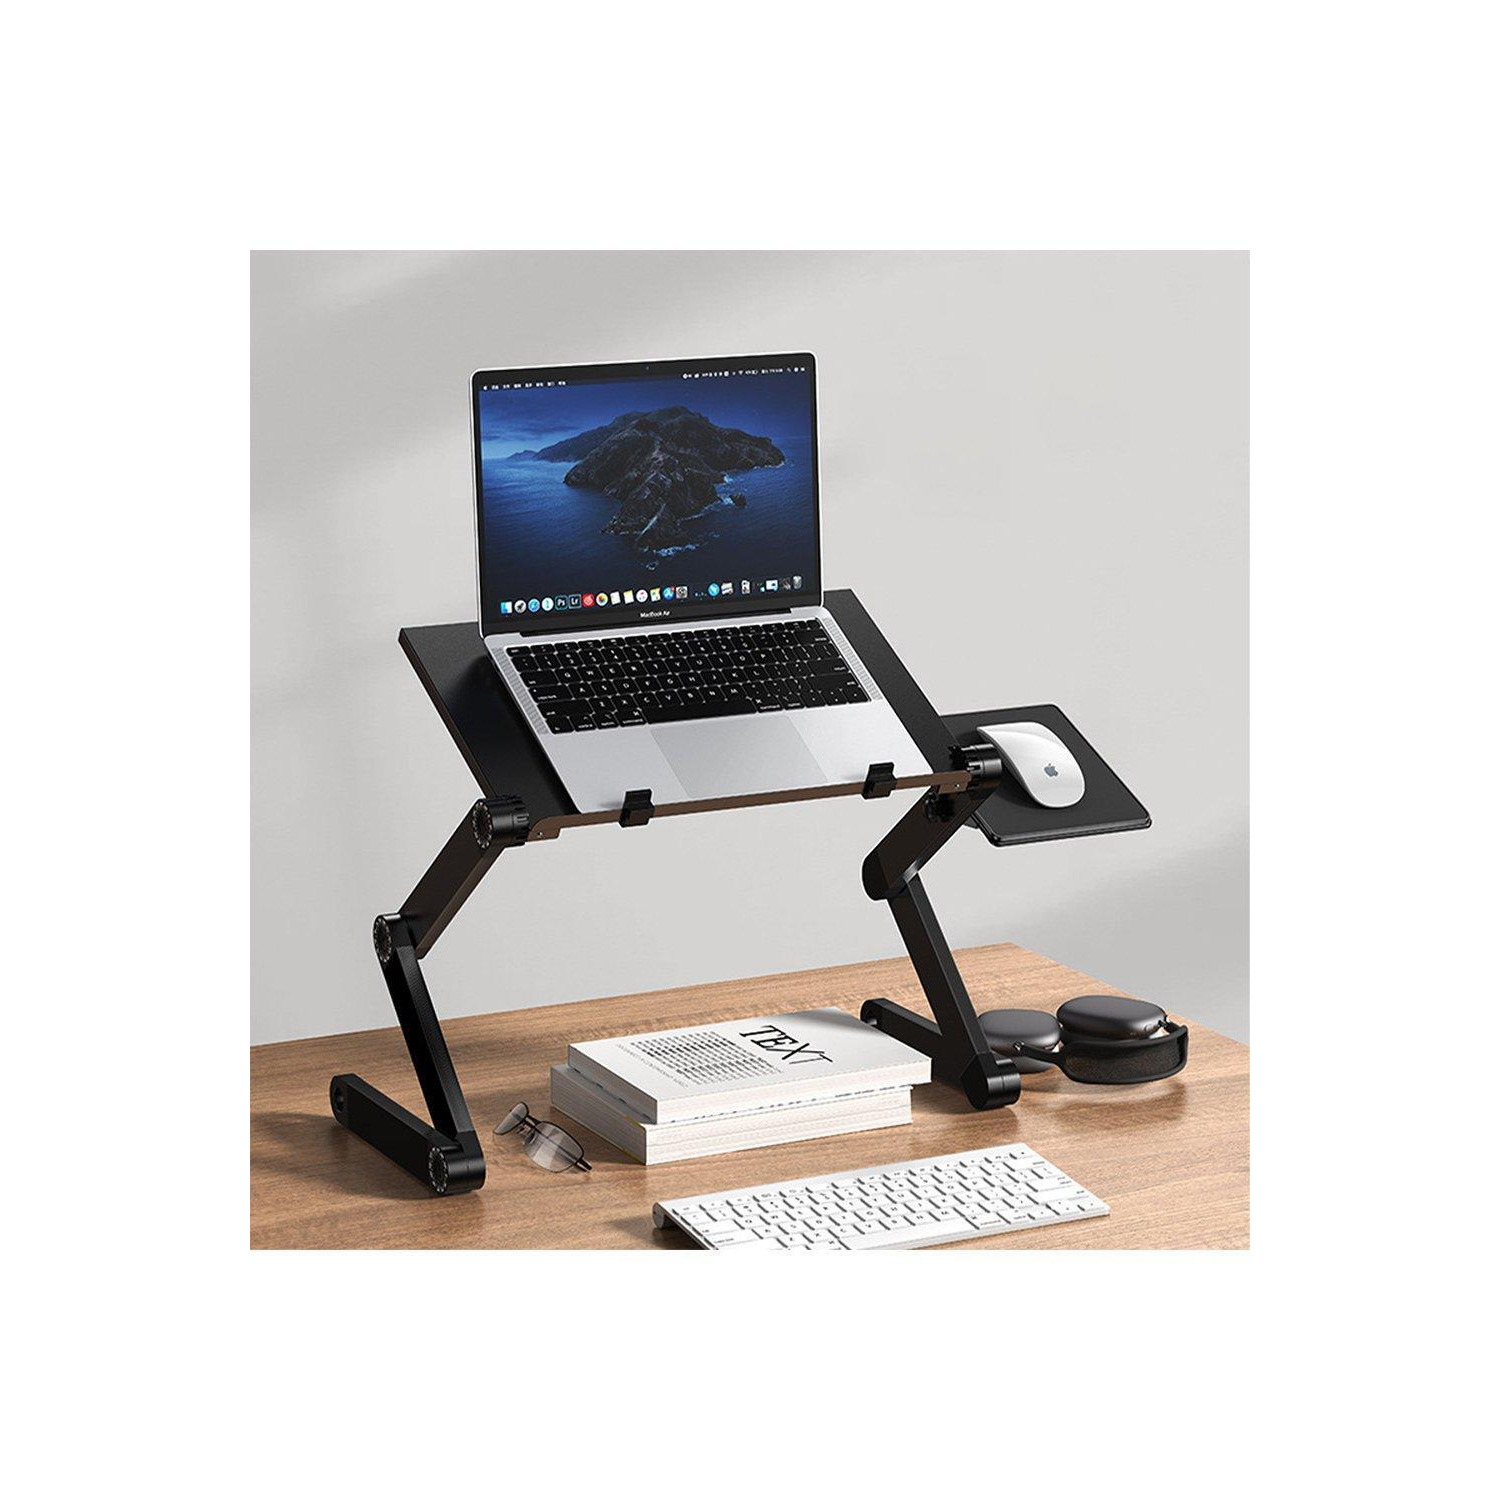 Adjustable Foldable Laptop Vented Table Computer Stand - image 1